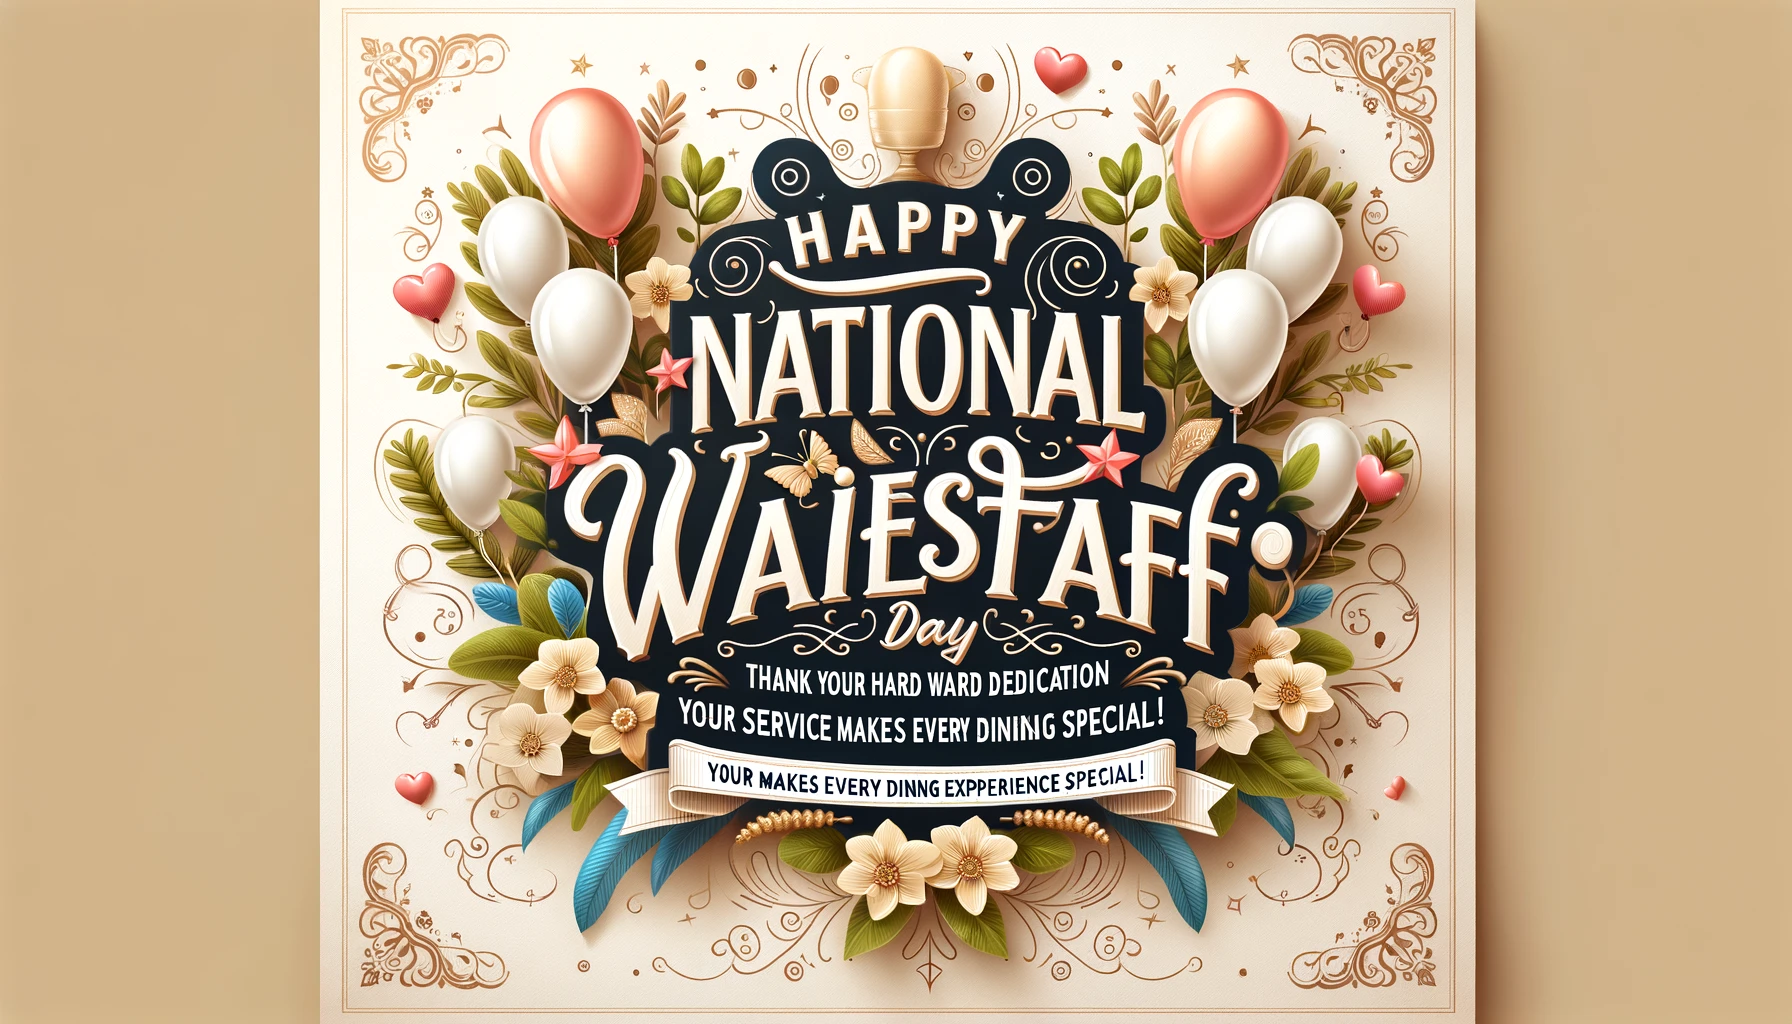 Beautiful Messages for Waitstaff on National Waitstaff Day